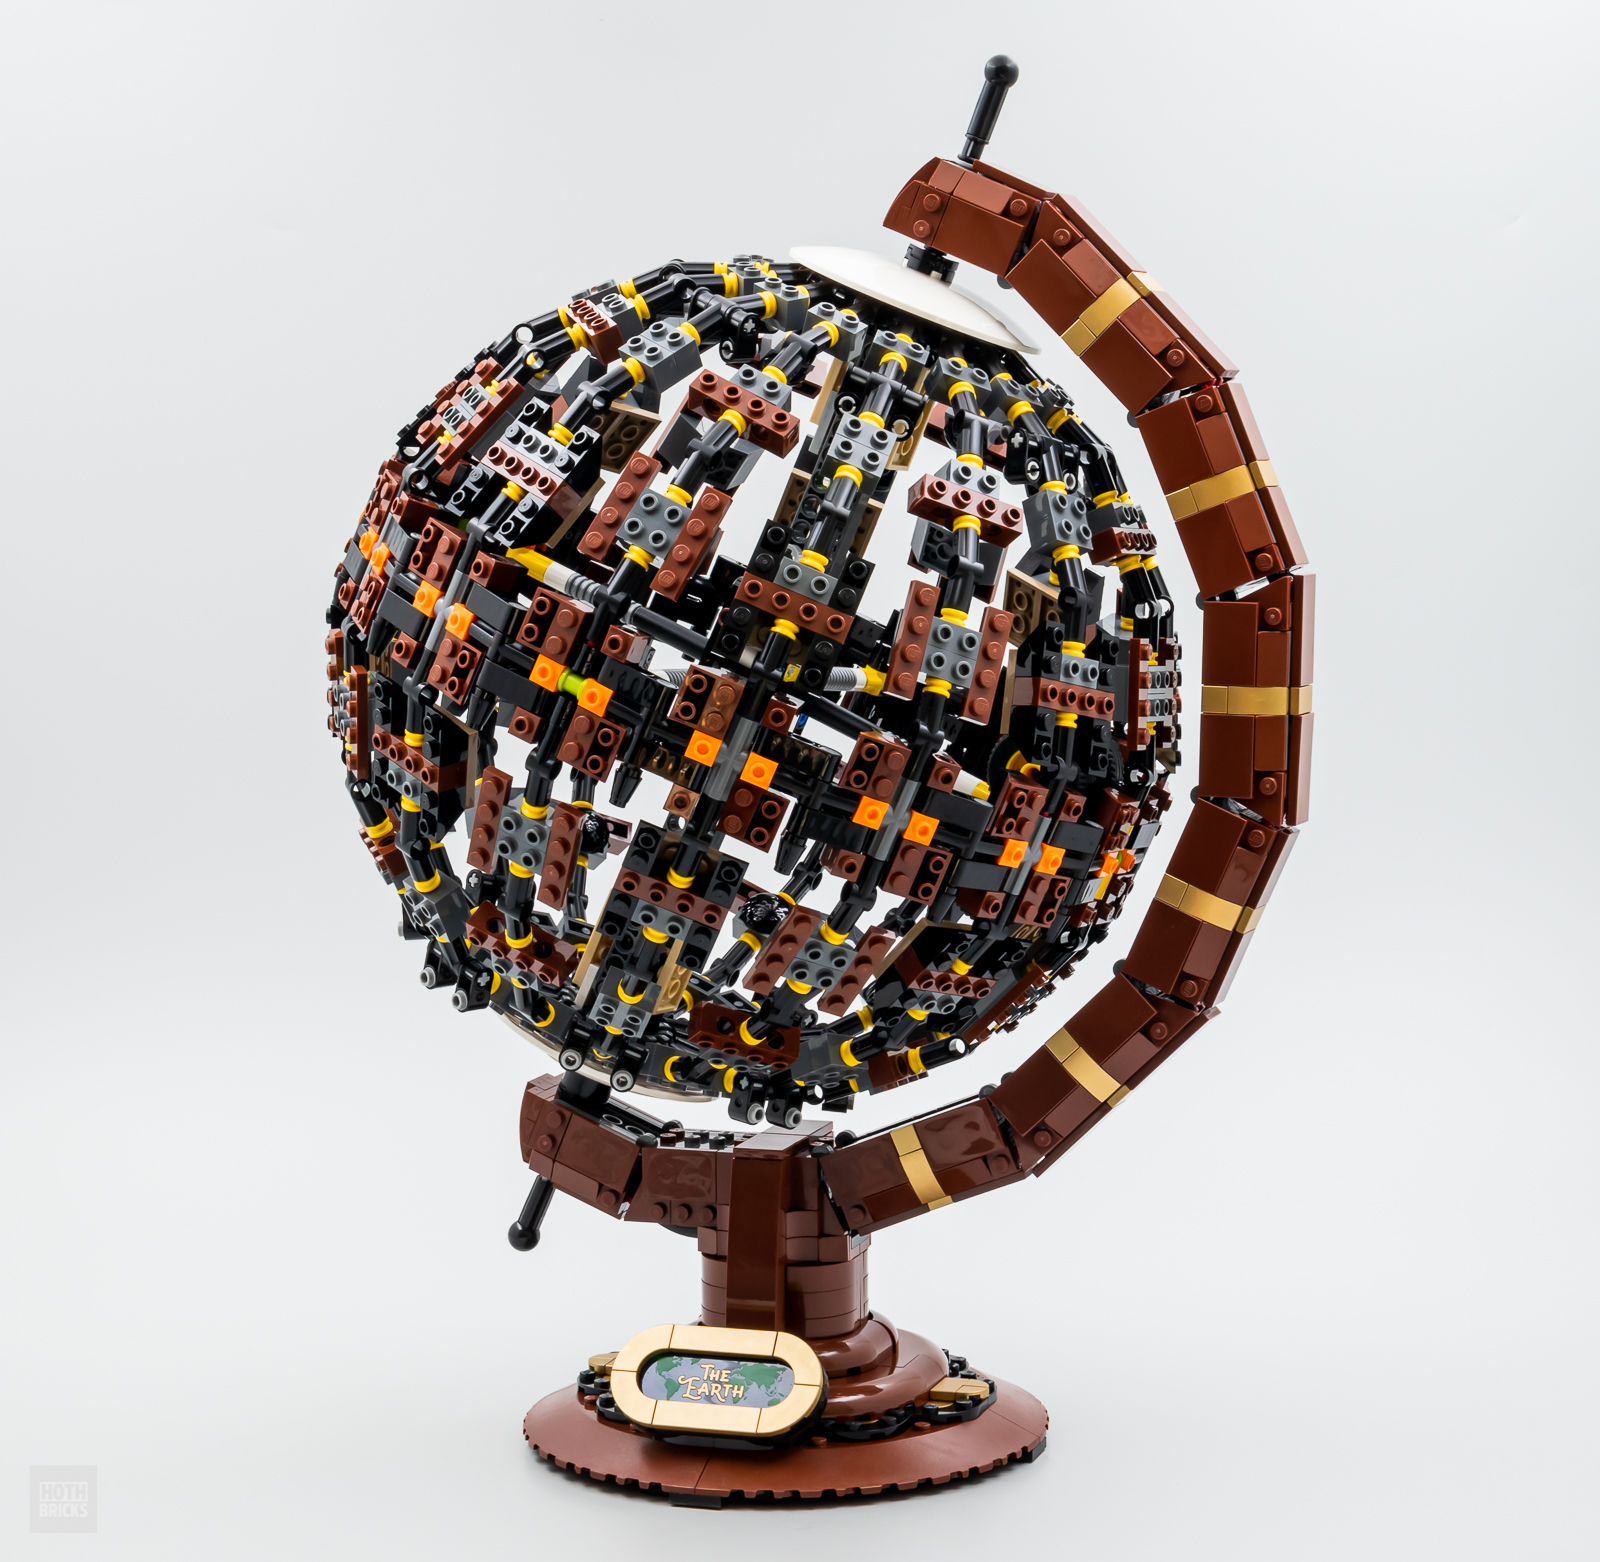 LEGO 21332 The Globe detailed building review + motorized spin